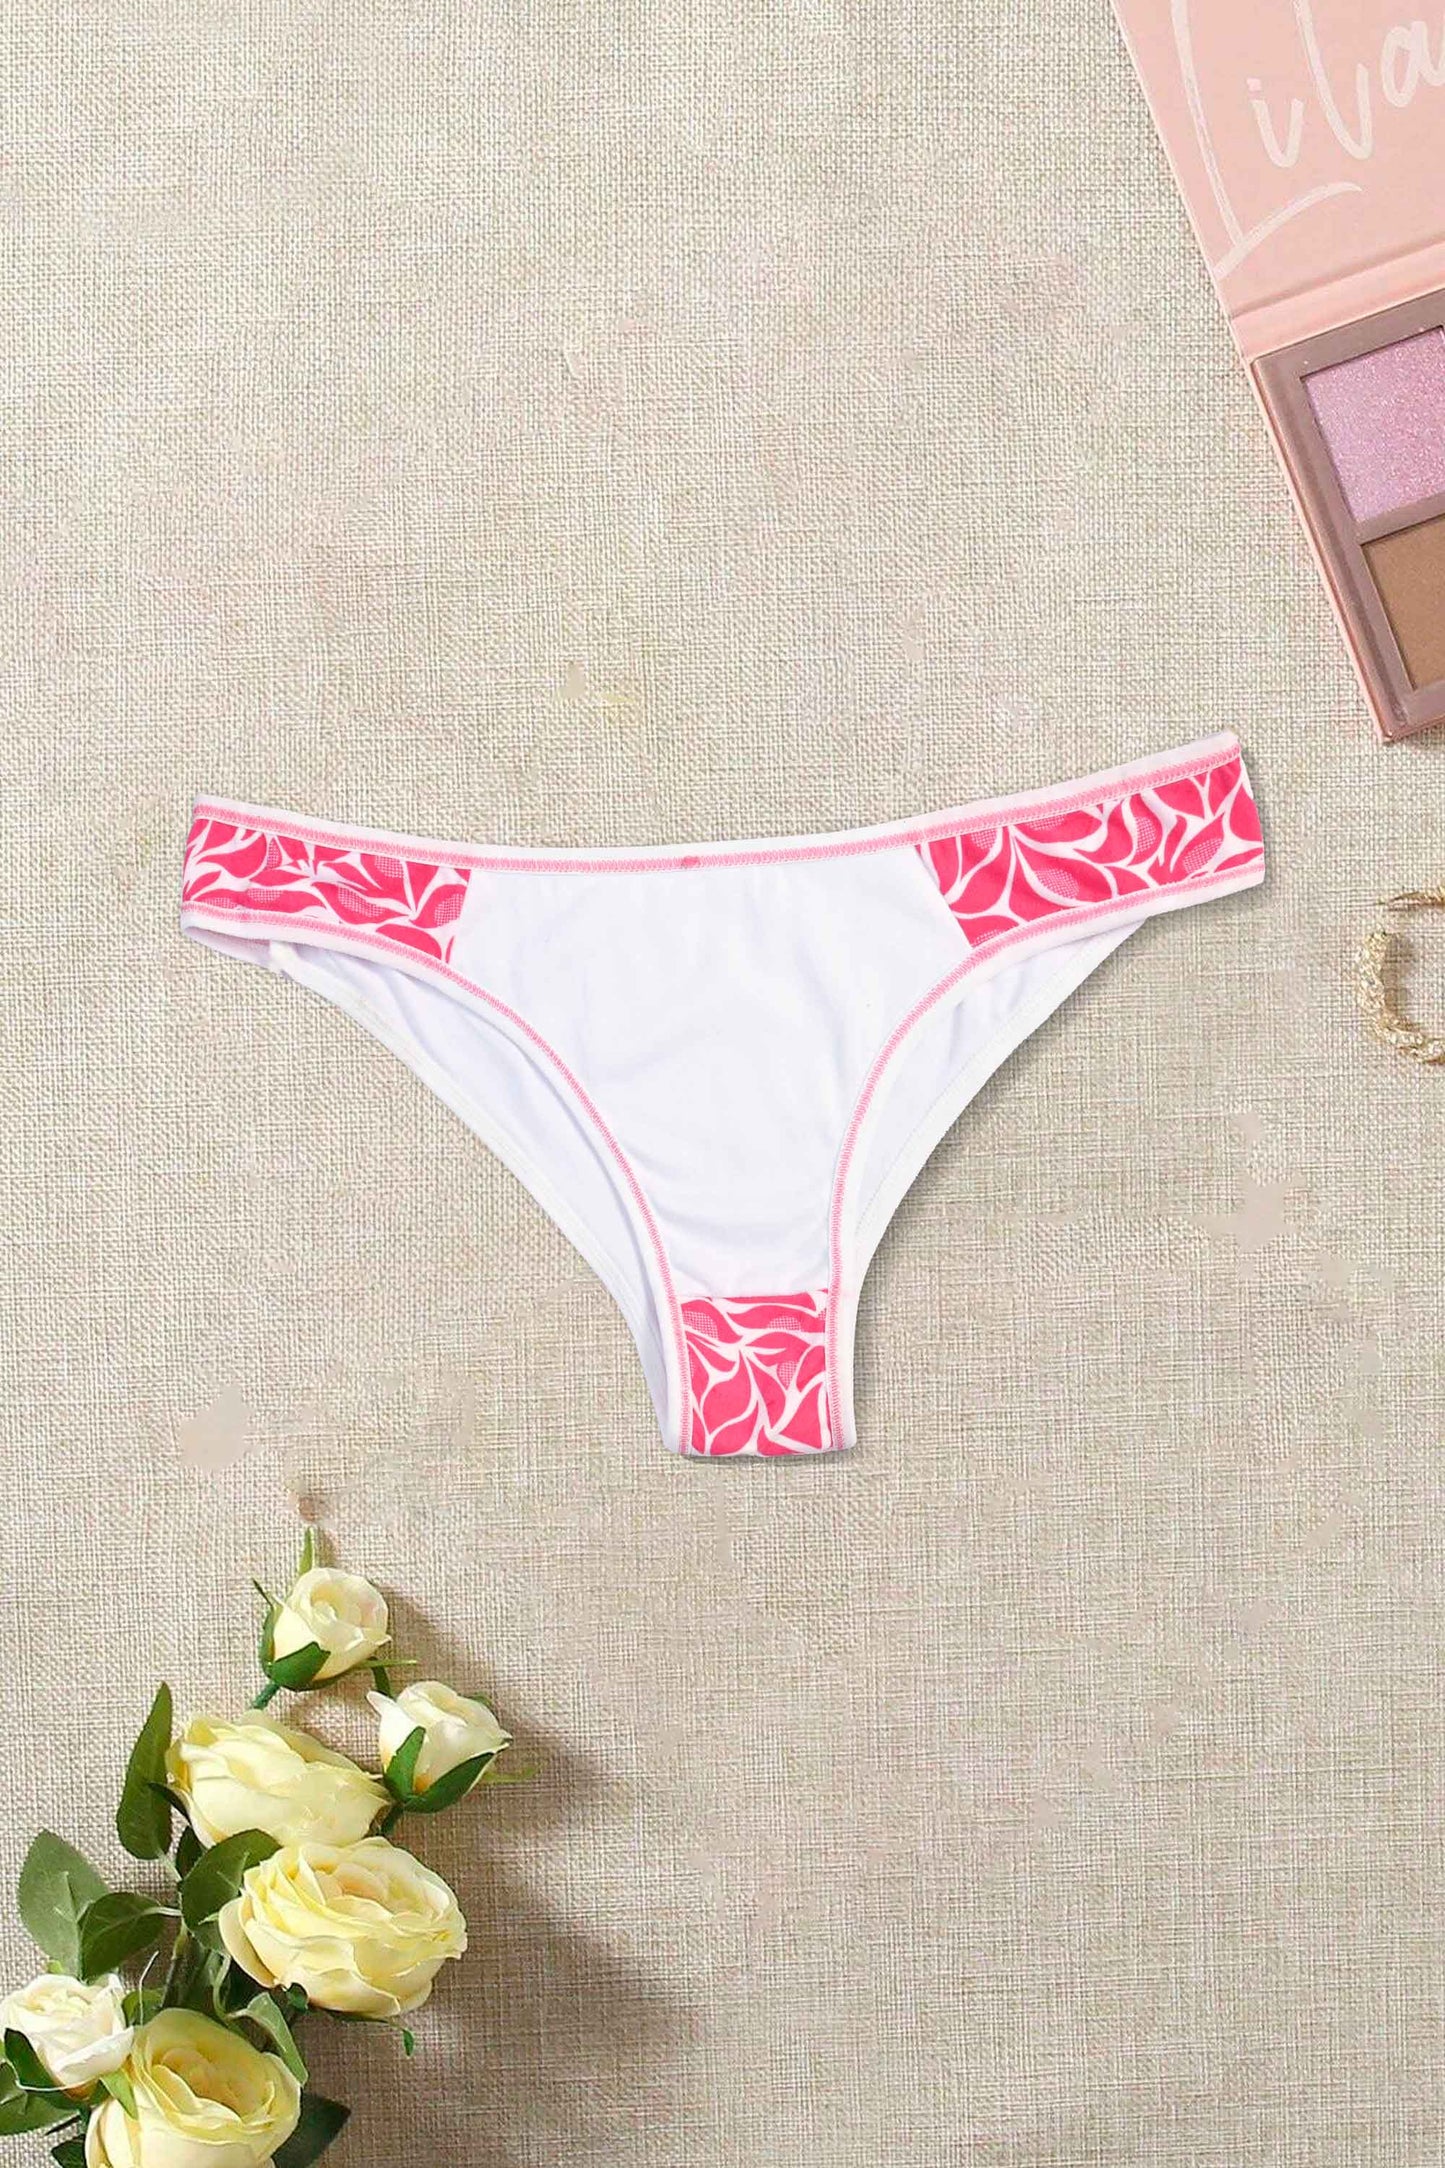 Tongfu Women's Stretched Thong Underwear